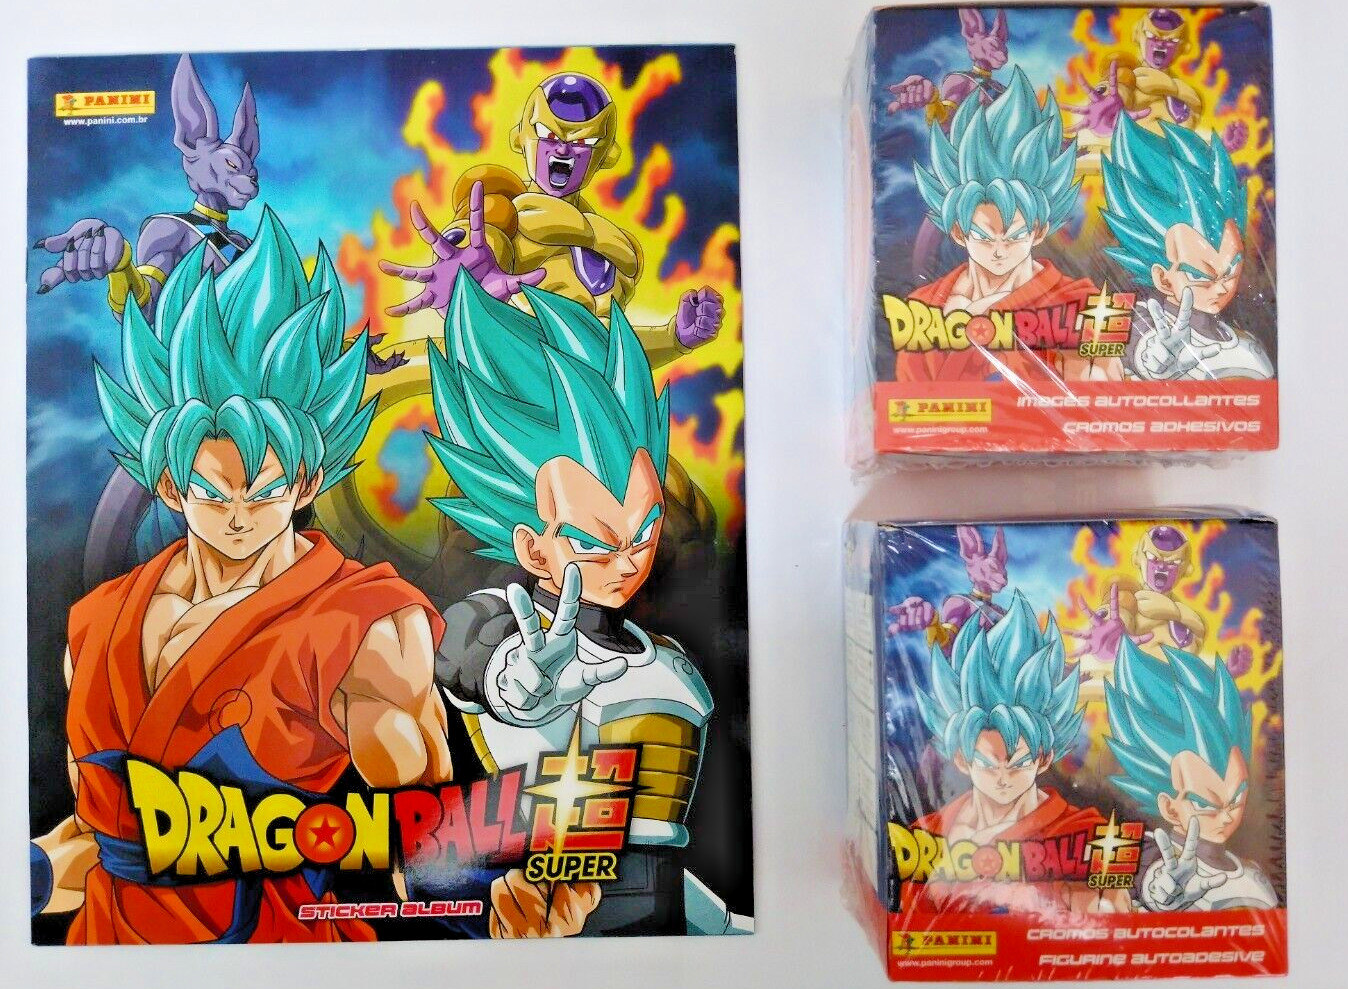 DRAGON BALL SUPER PANINI 2018 - 02 BOXES = 100 SEALED PACKAGES + EMPTY ALBUM